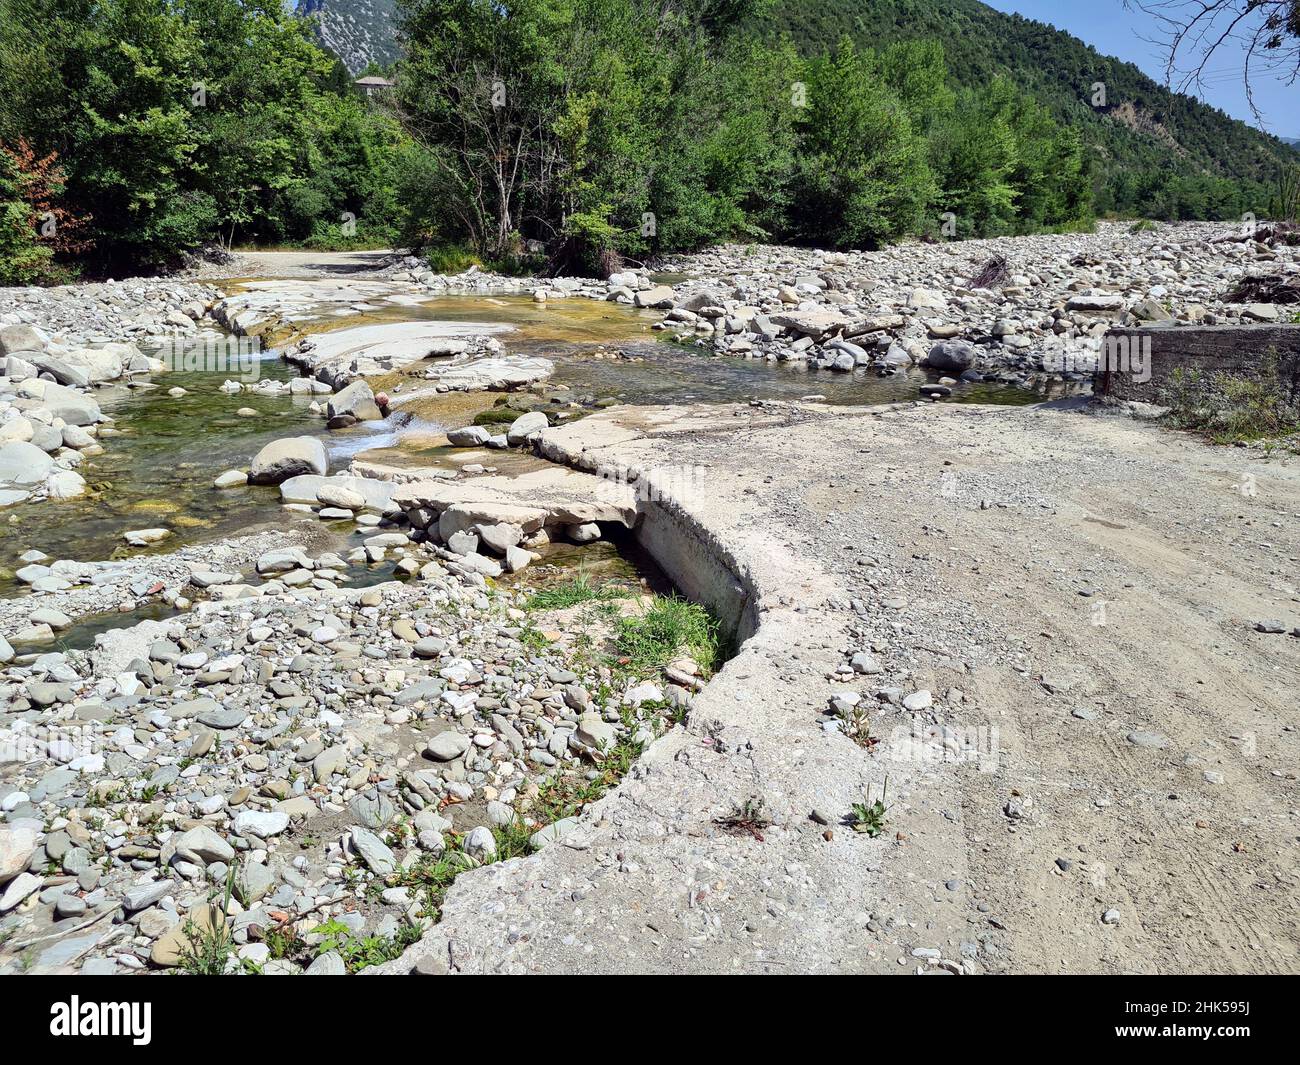 Greece, Epirus, river bank where the road became impassable in the National Park of Tzoumerka- Peristeri- Arachthos Gorge and Acheloos valley; Stock Photo